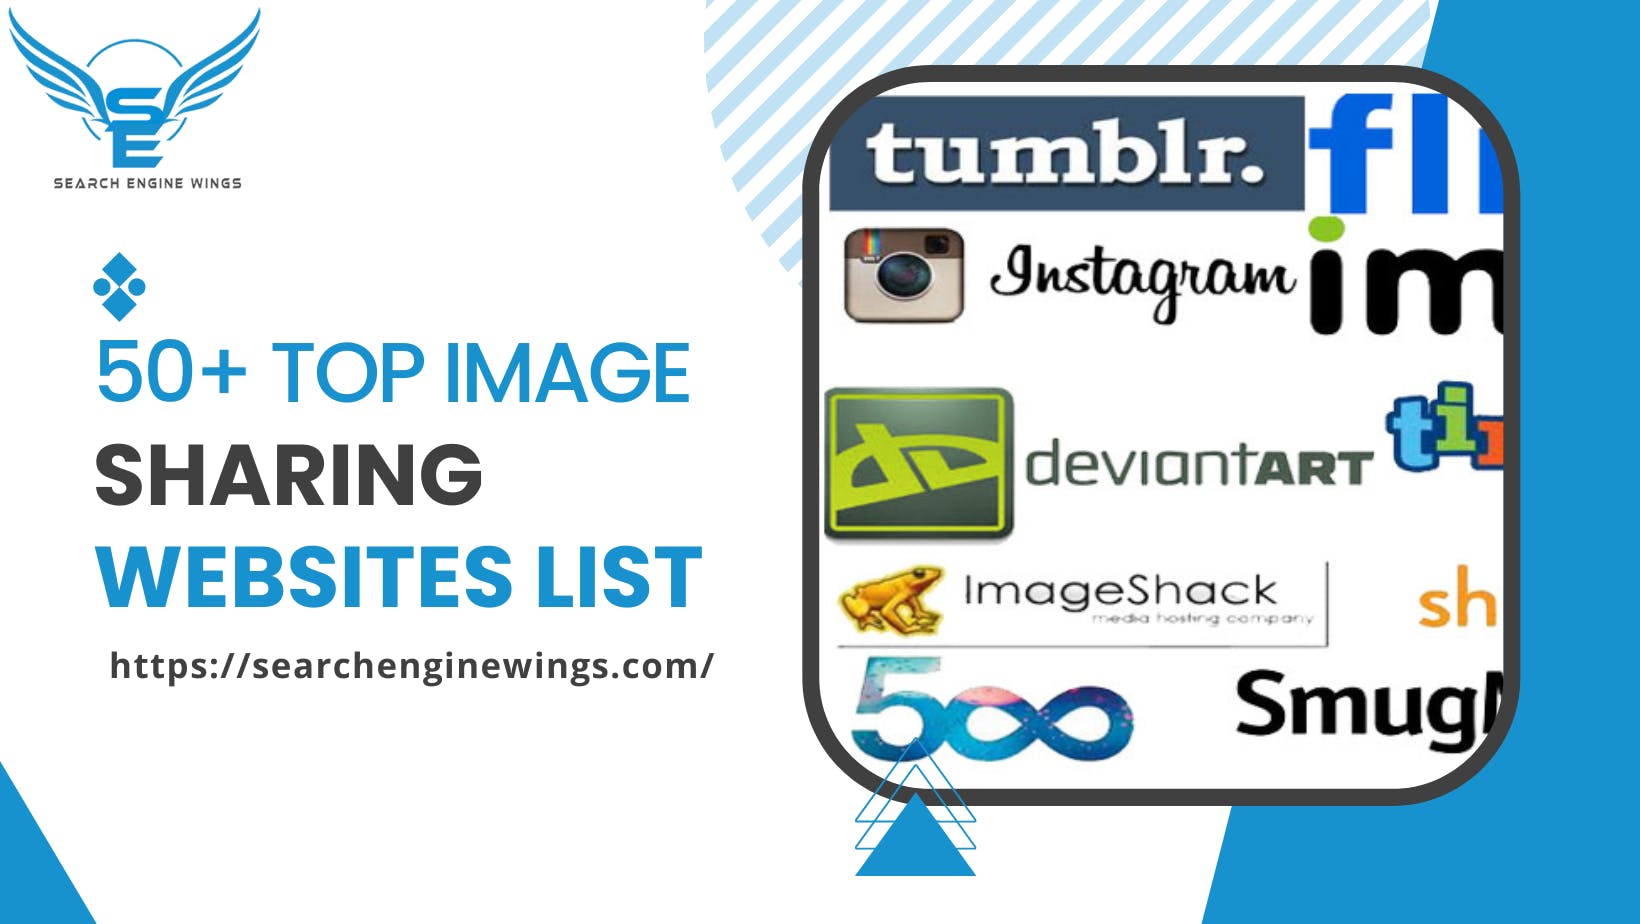 Top Image Sharing sites list.png